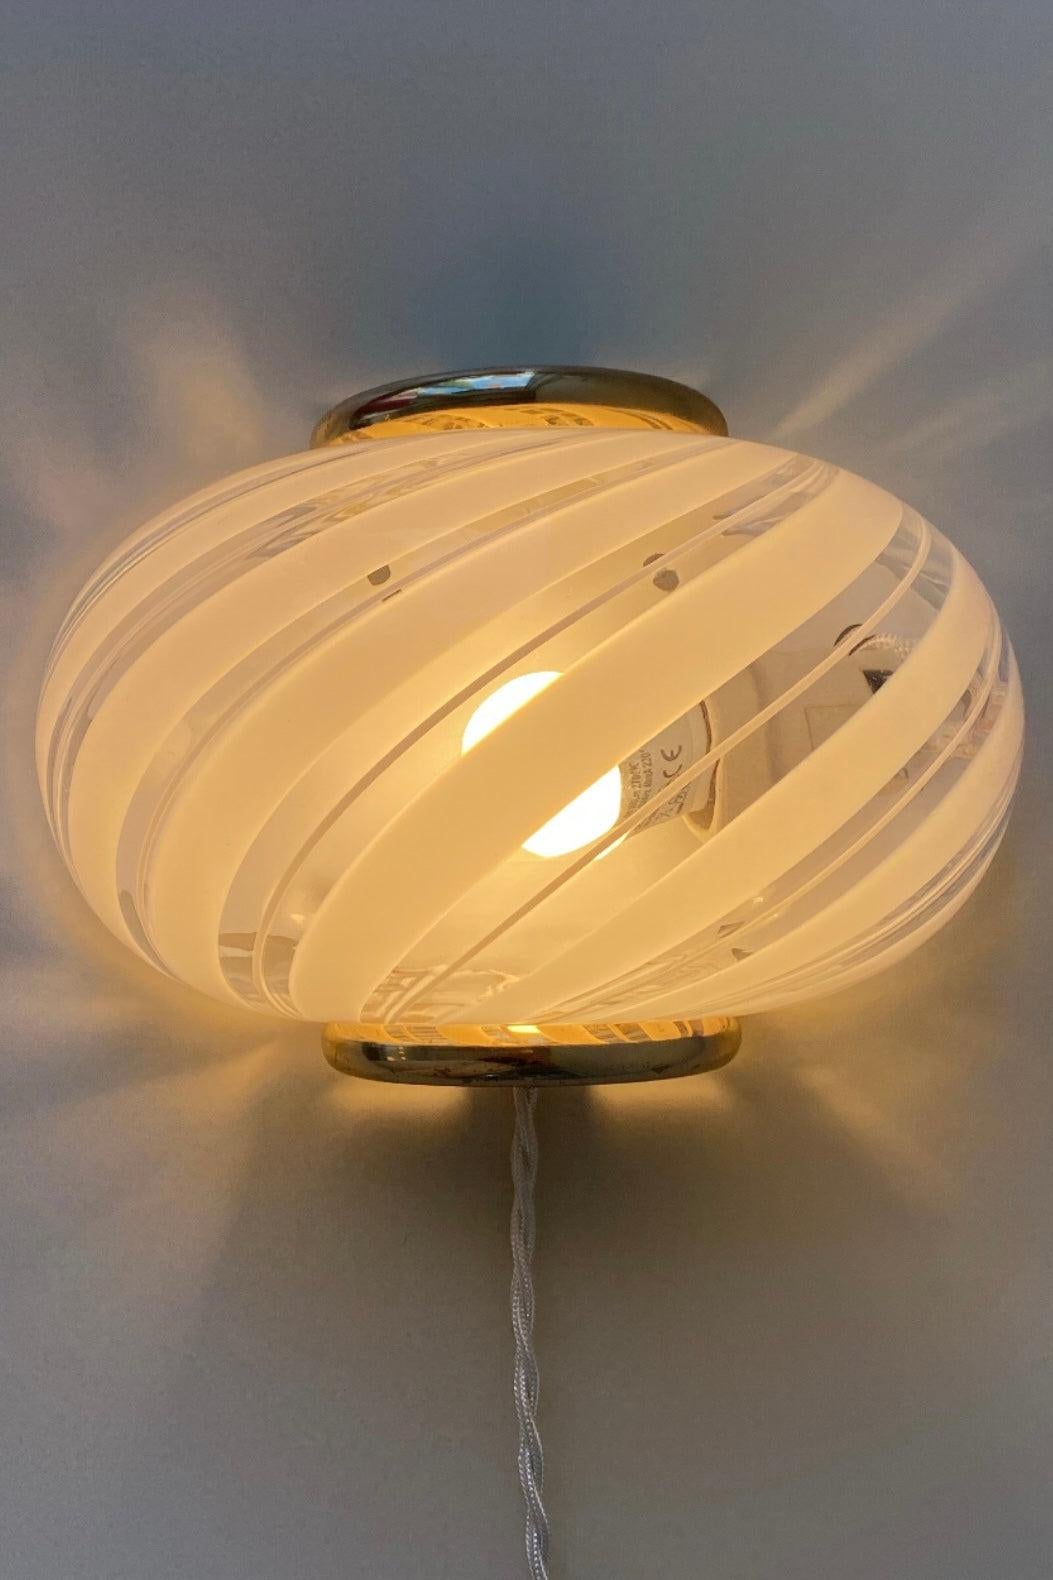 Vintage Murano wall lamp in white glass with swirl pattern and brass fittings. Perfect size for your entrance hall, living room or bedroom. Super easy to fit. Mouth blown in Italy, 1960s/70s, swirl may vary. Size 22x15 cm.
Item 532-3 + 532-4.